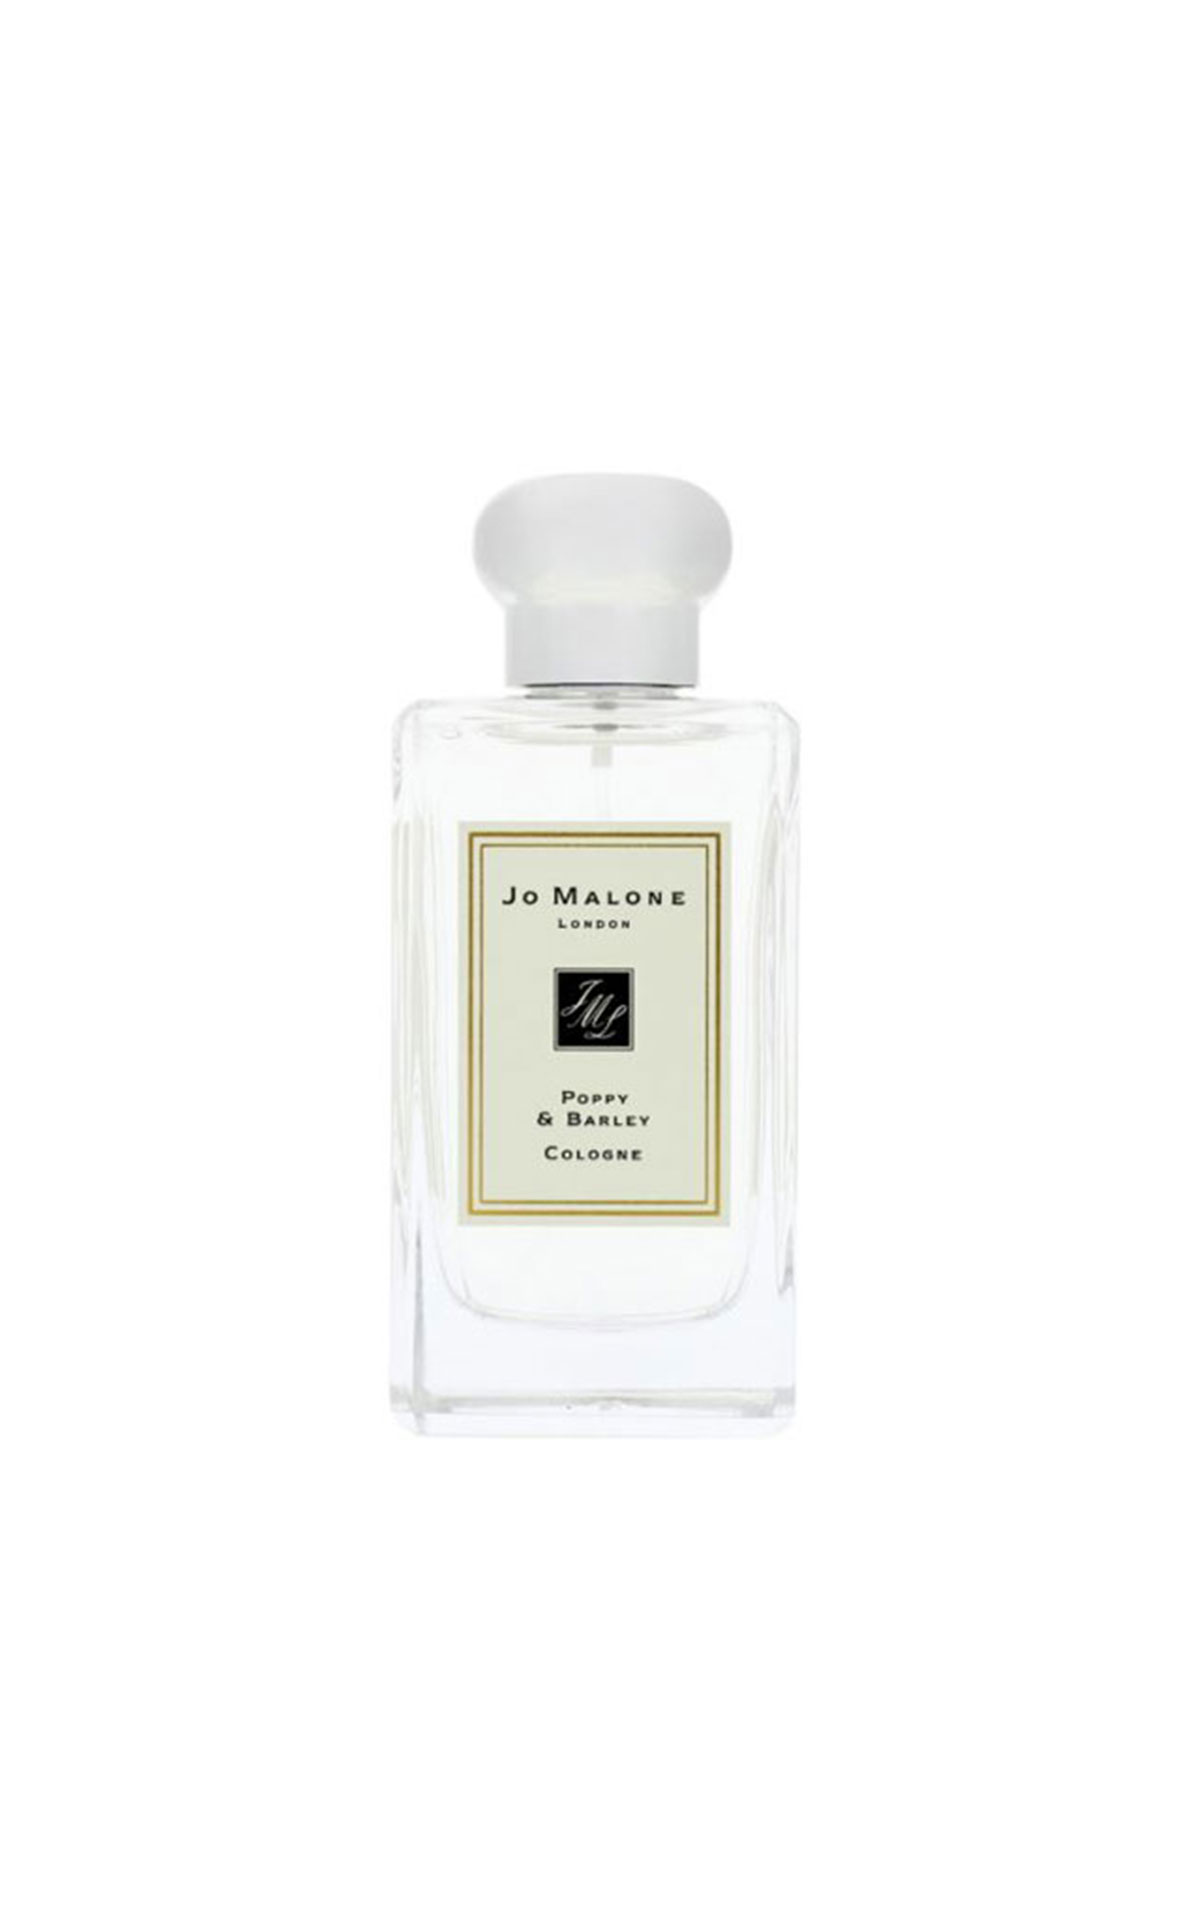 The Cosmetics Company Store Jo Malone London Poppy and barley cologne from Bicester Village